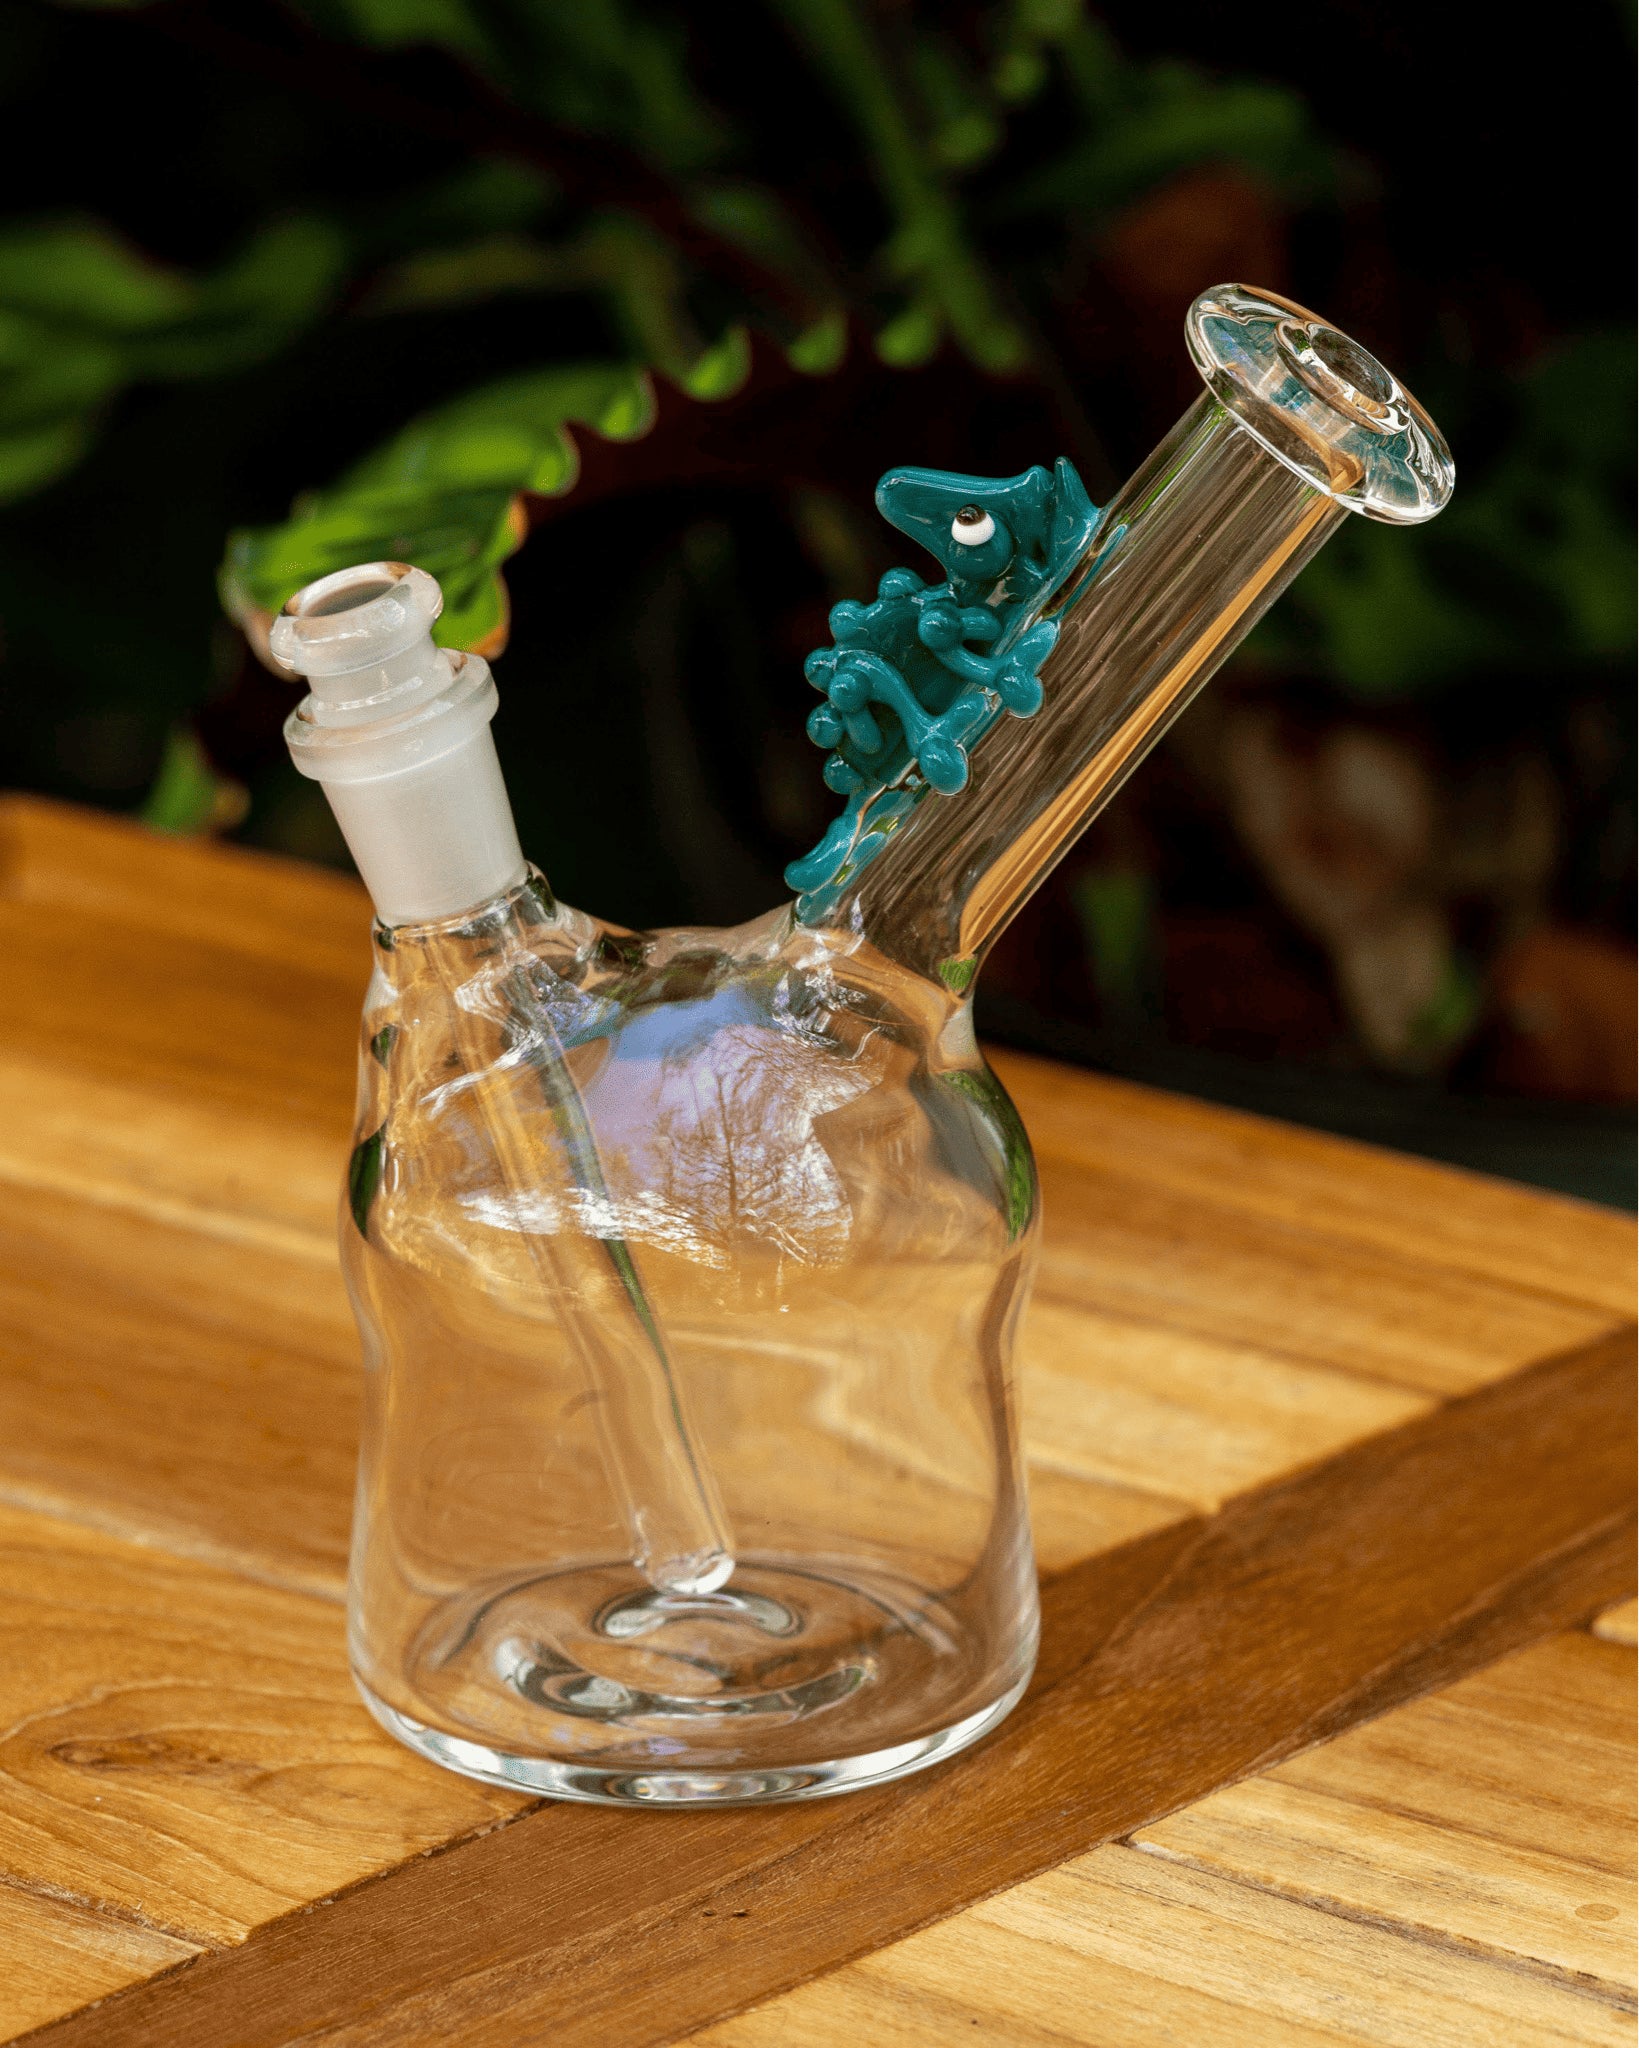 meticulously crafted design of the Clear Rig w/ Aqua Azul Chameleon (C) by Willy That Glass Guy